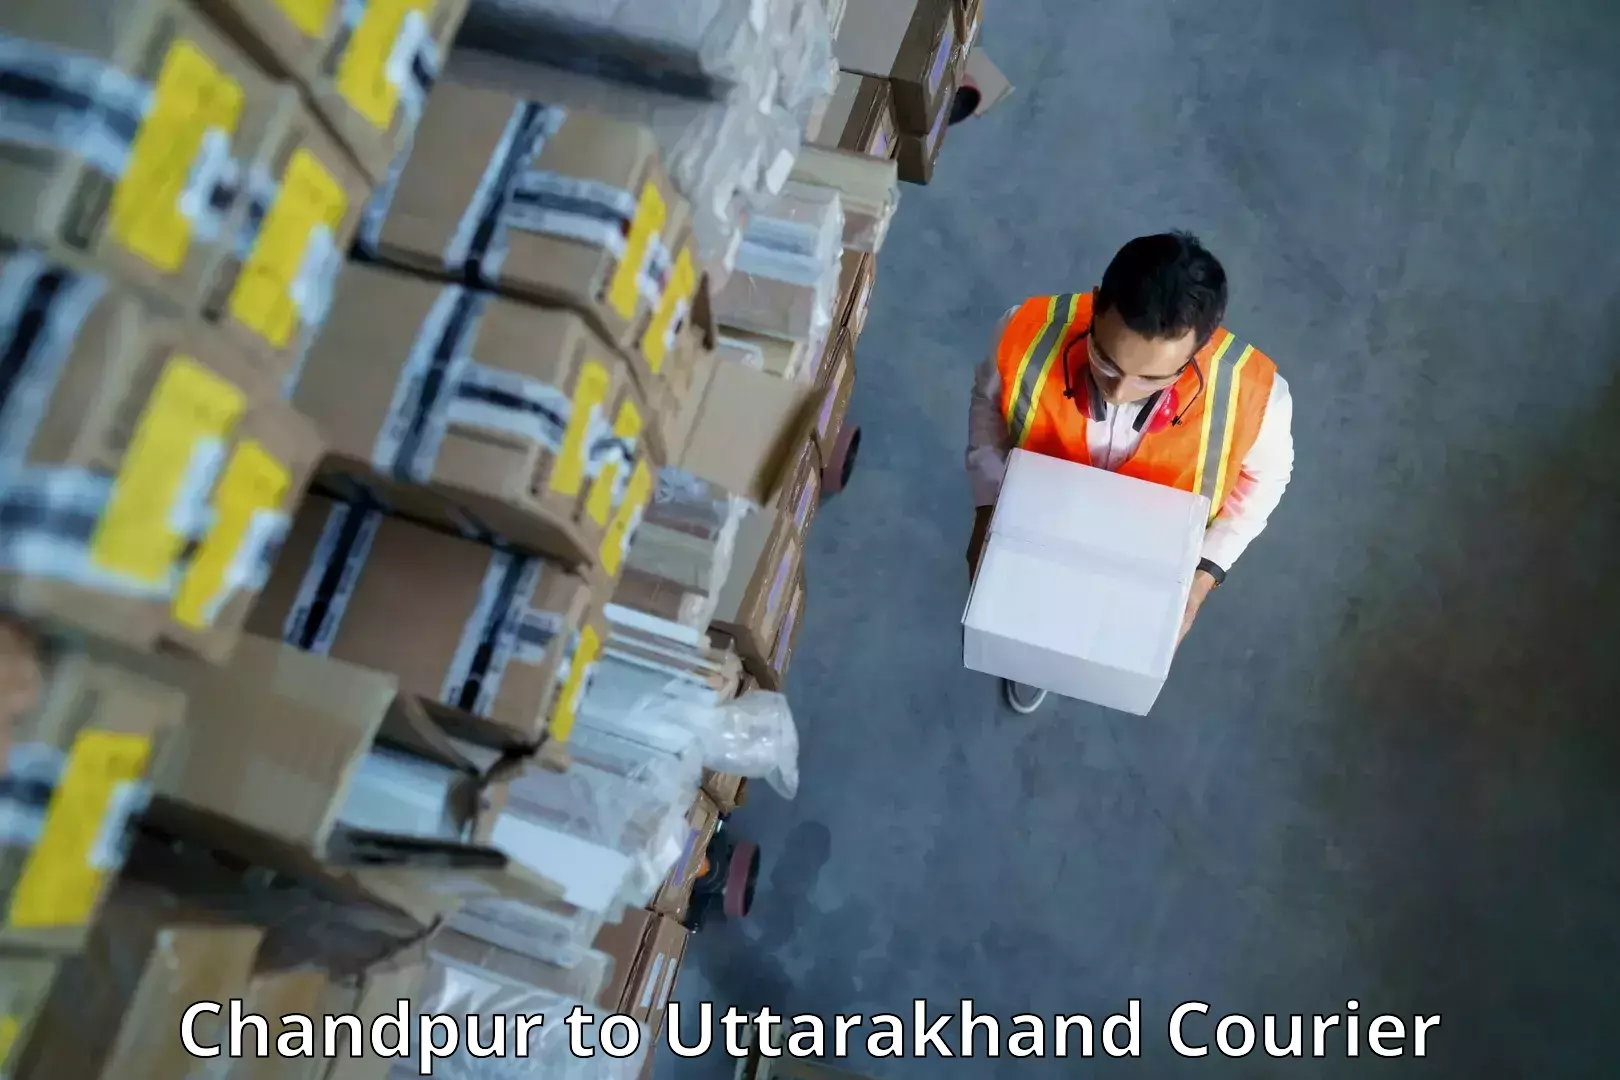 Reliable delivery network Chandpur to Uttarakhand